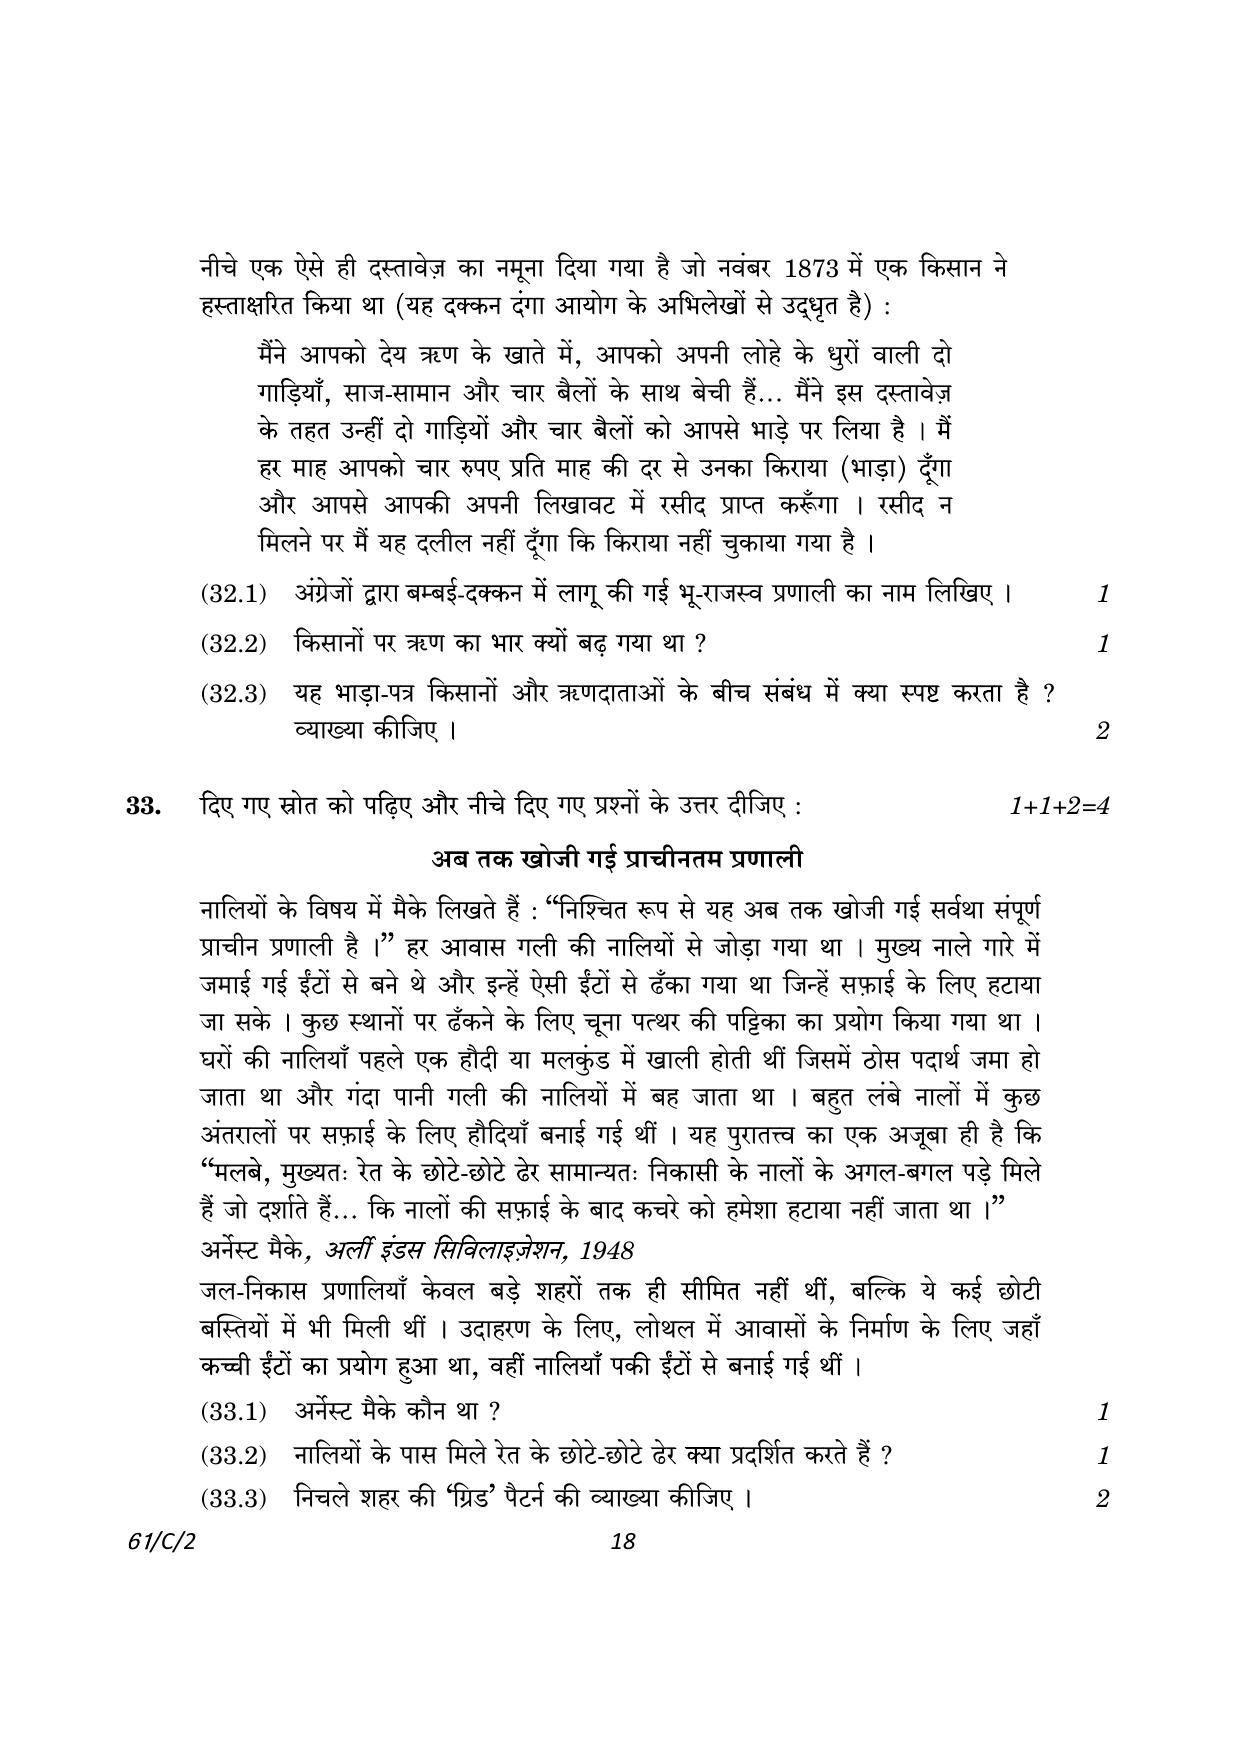 CBSE Class 12 61-2 History 2023 (Compartment) Question Paper - Page 18